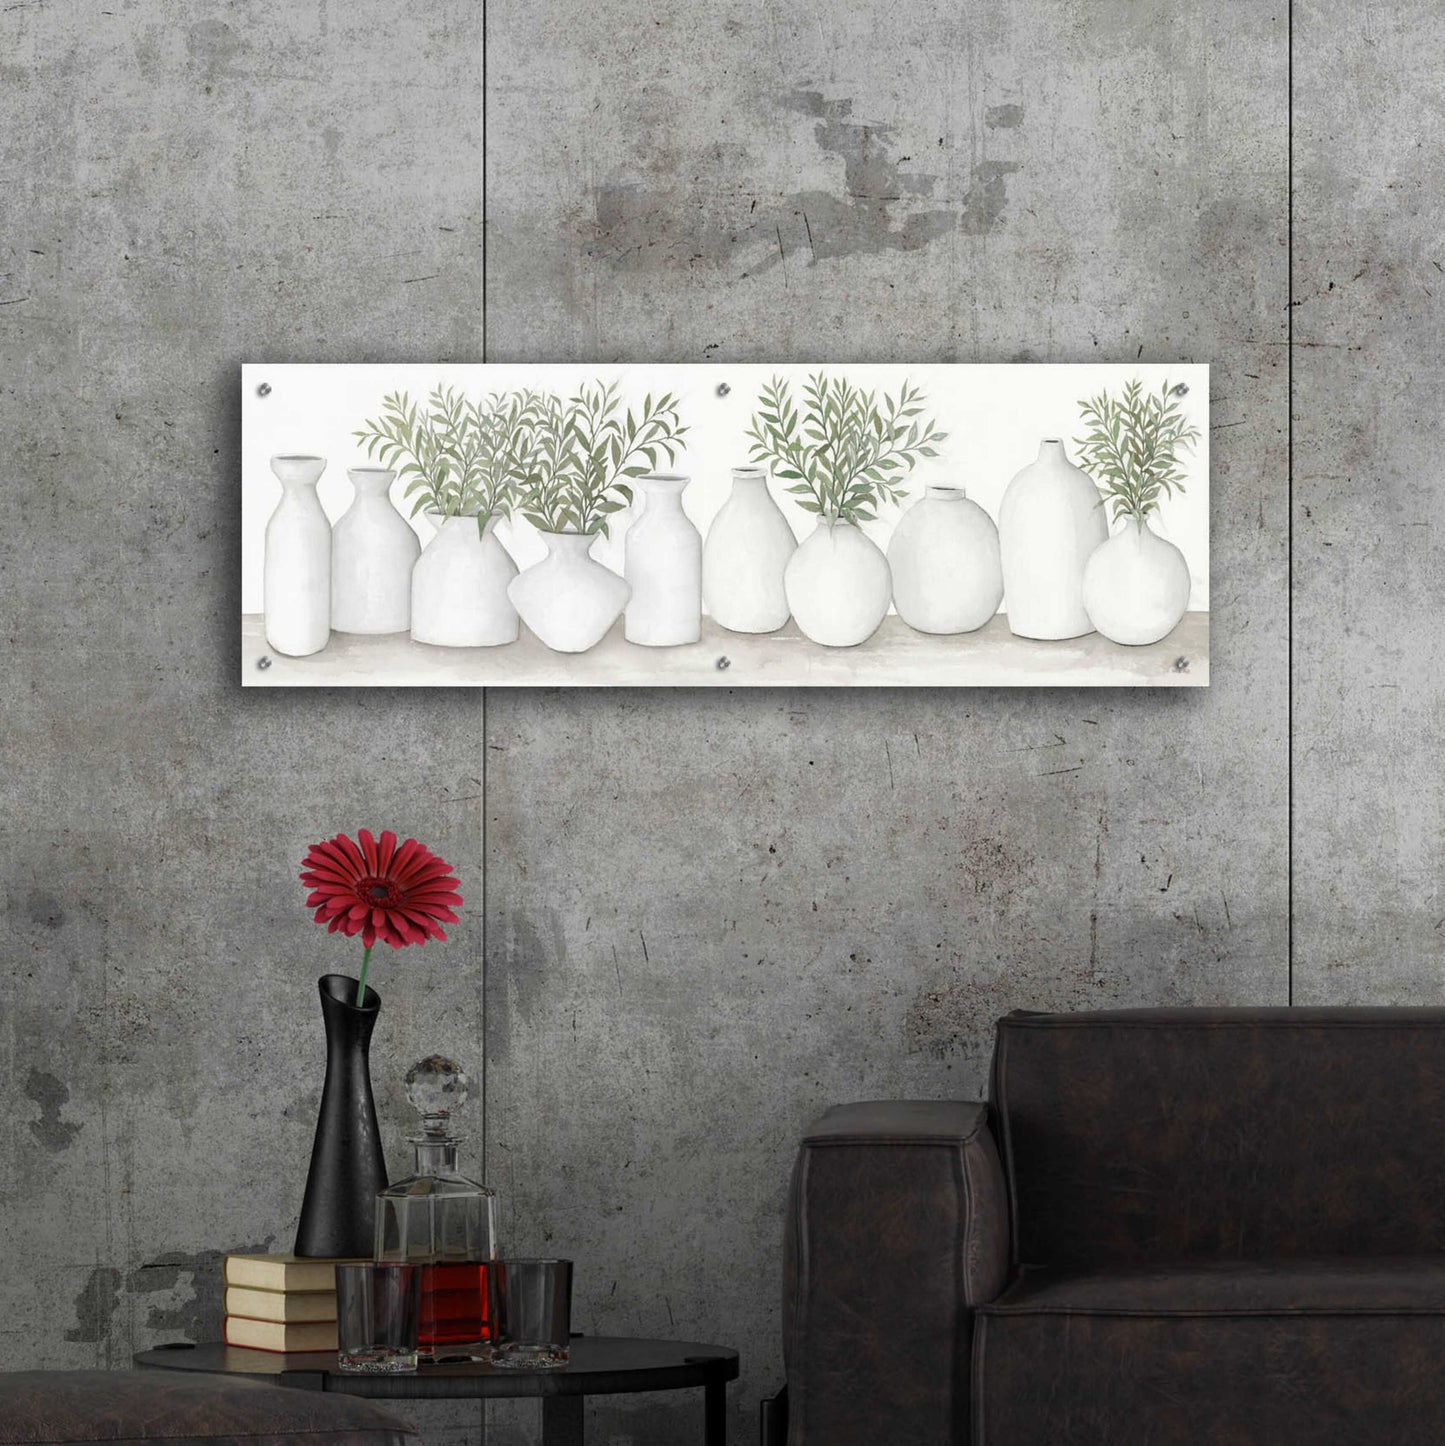 Epic Art 'White Vases Still Life' by Cindy Jacobs, Acrylic Glass Wall Art,48x16